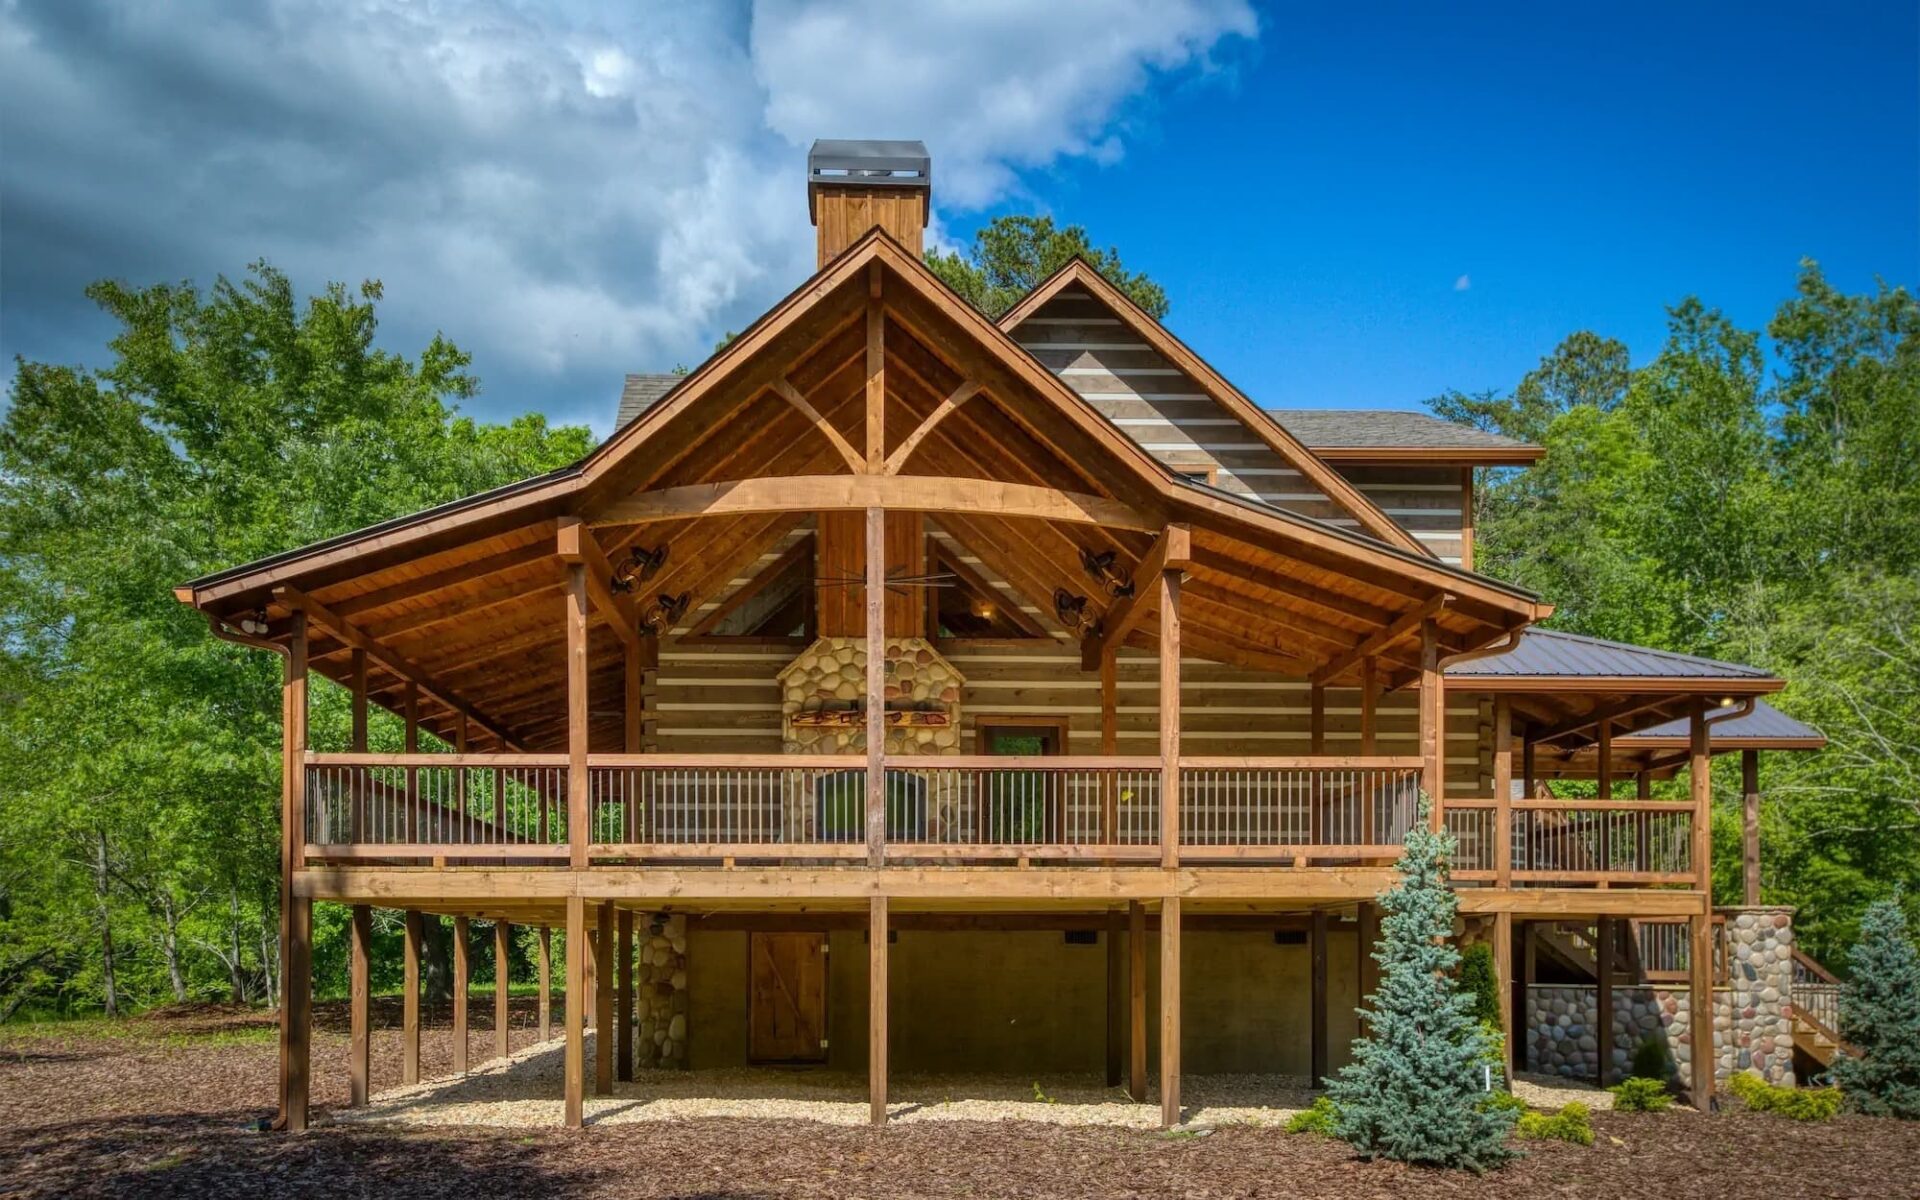 Our product image displays a stunning log home nestled amidst lush woods, boasting of a spacious deck and inviting porch.